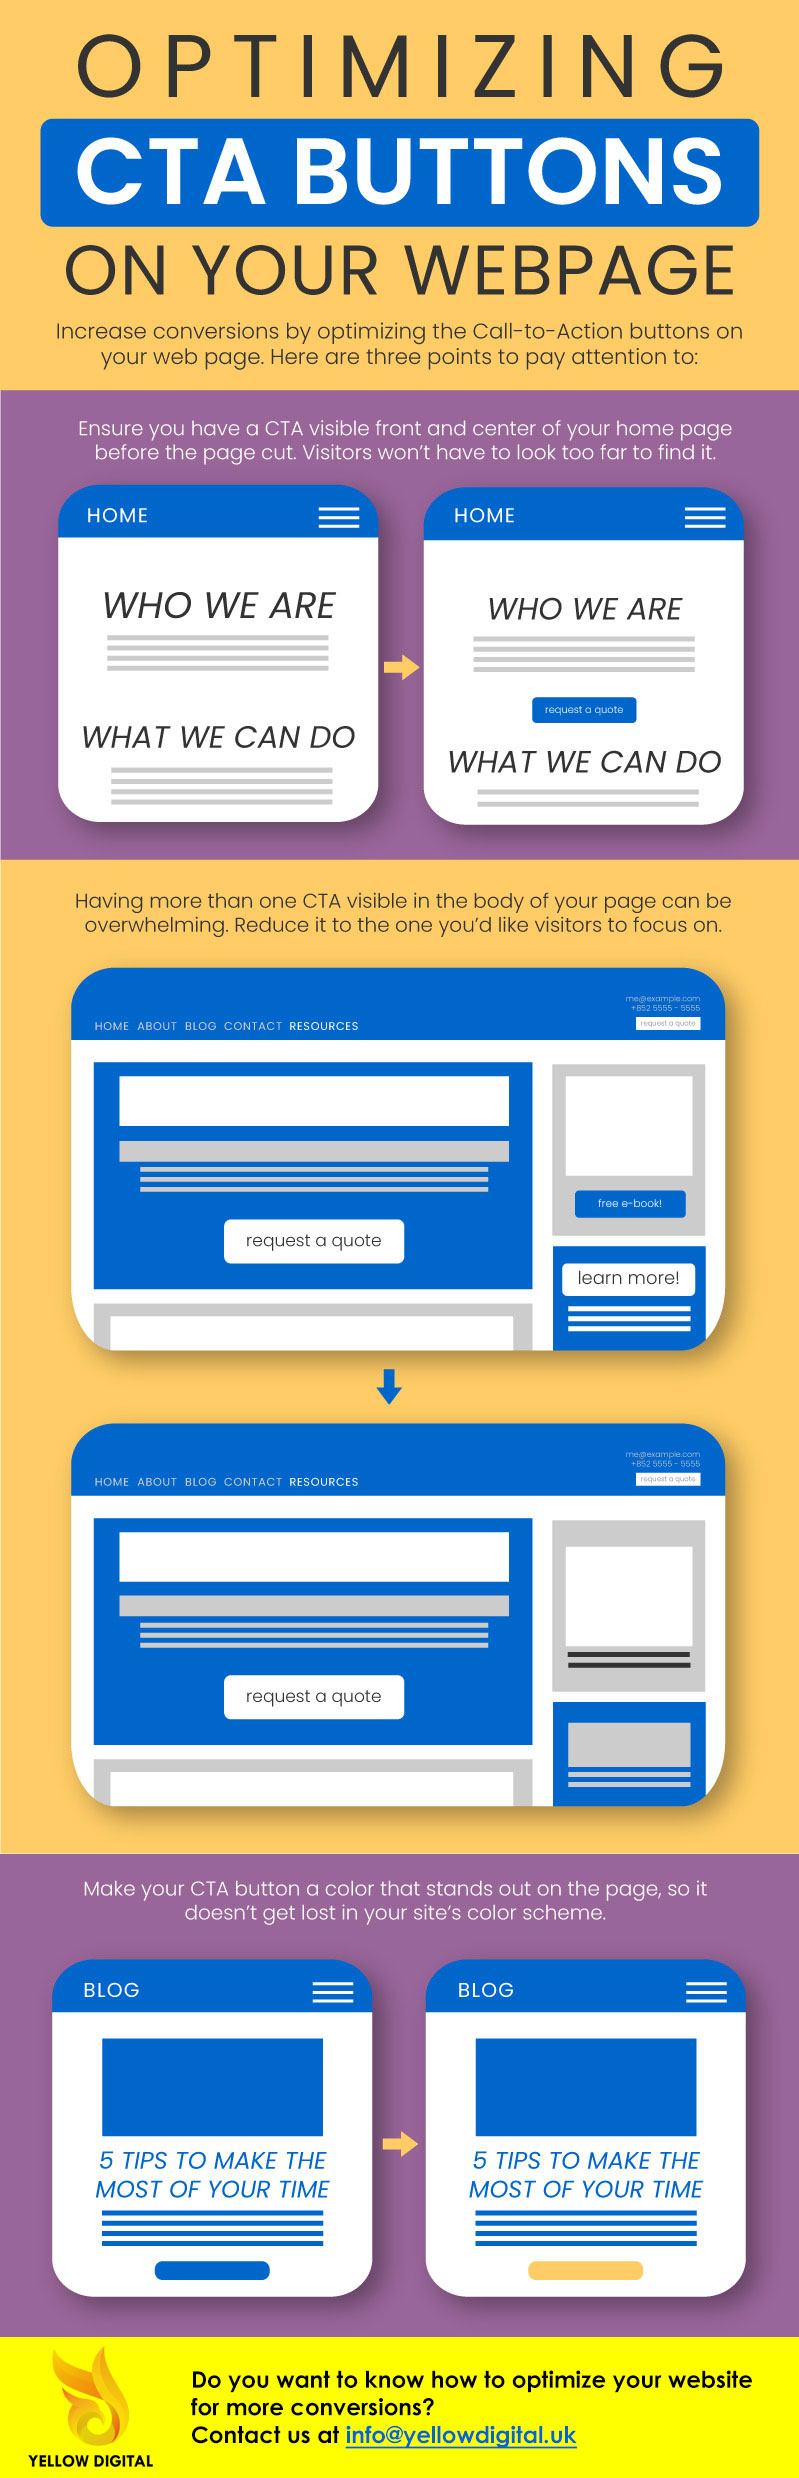 Optimizing CTA buttons on your webpage